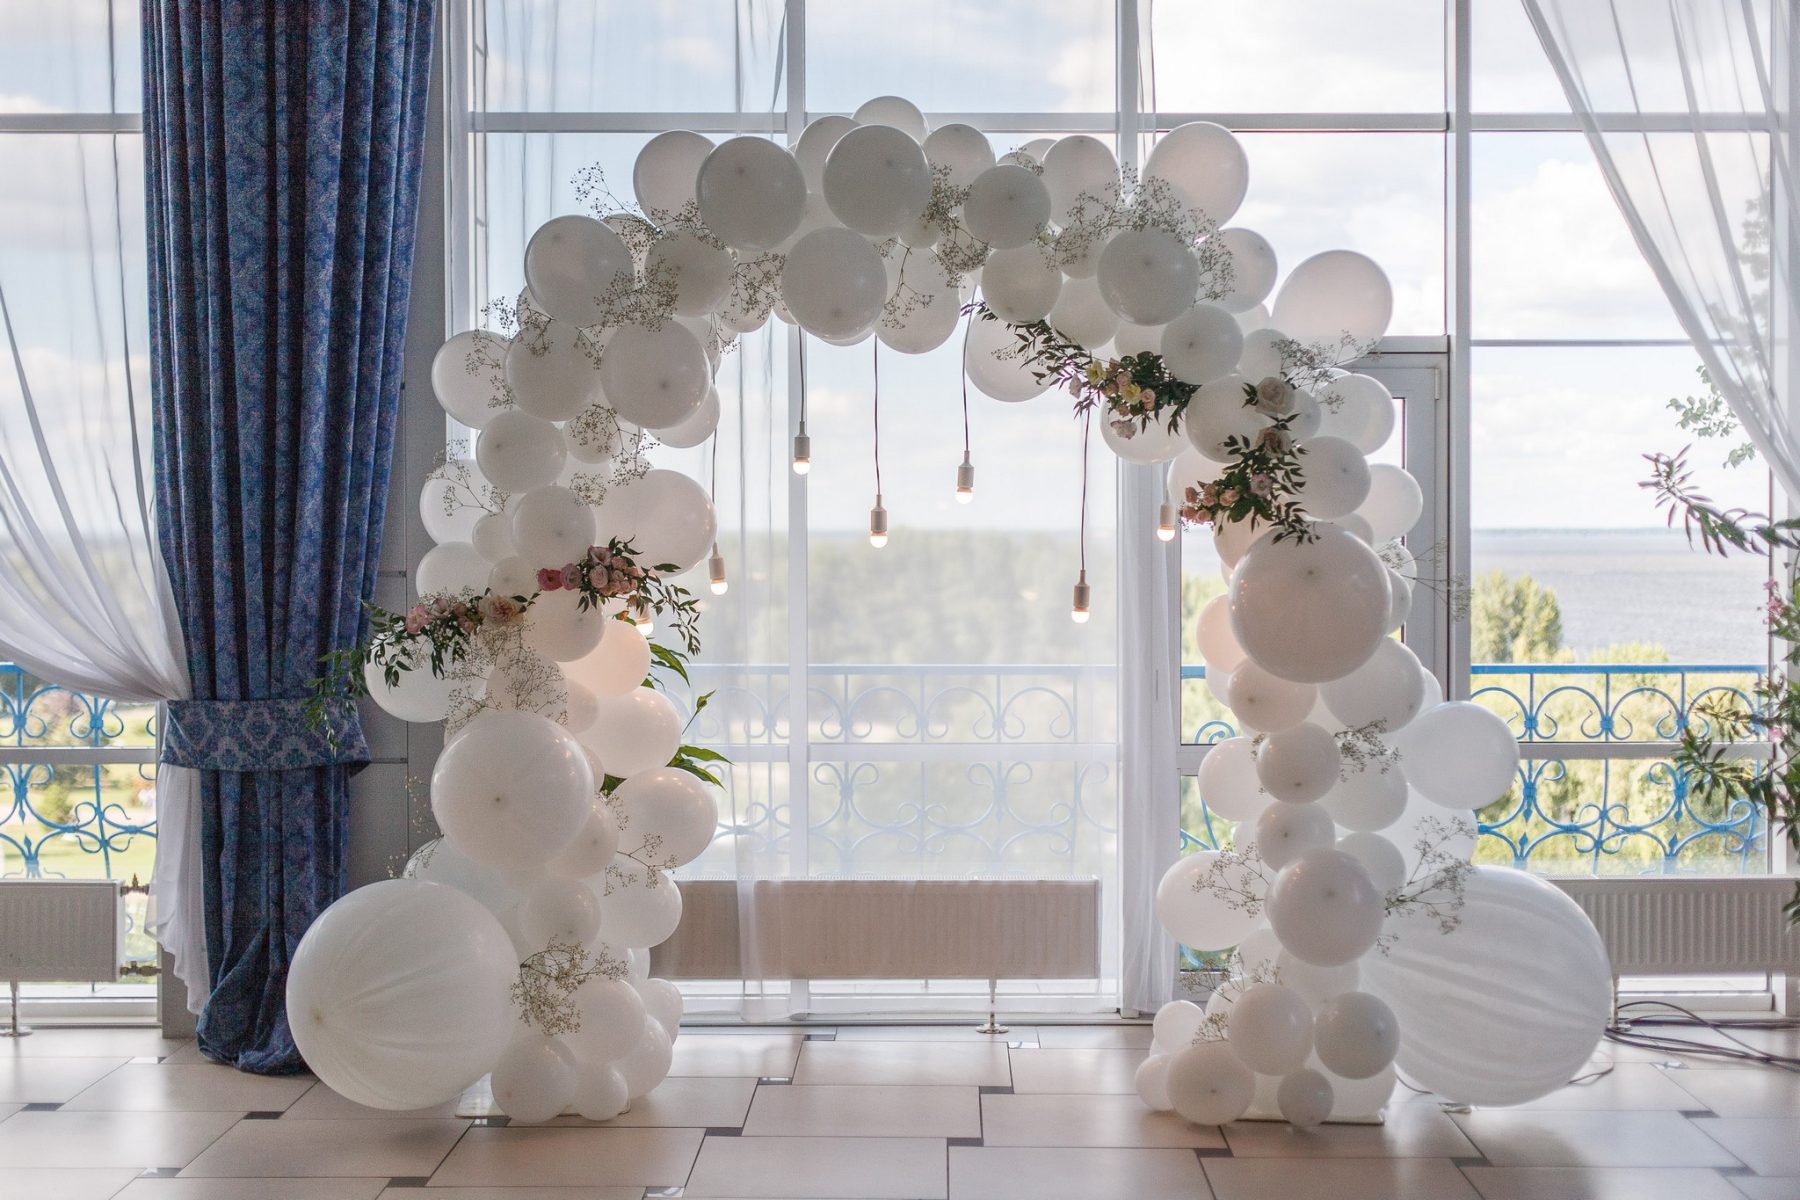 How Do You Make Balloon Arch Last Overnight?